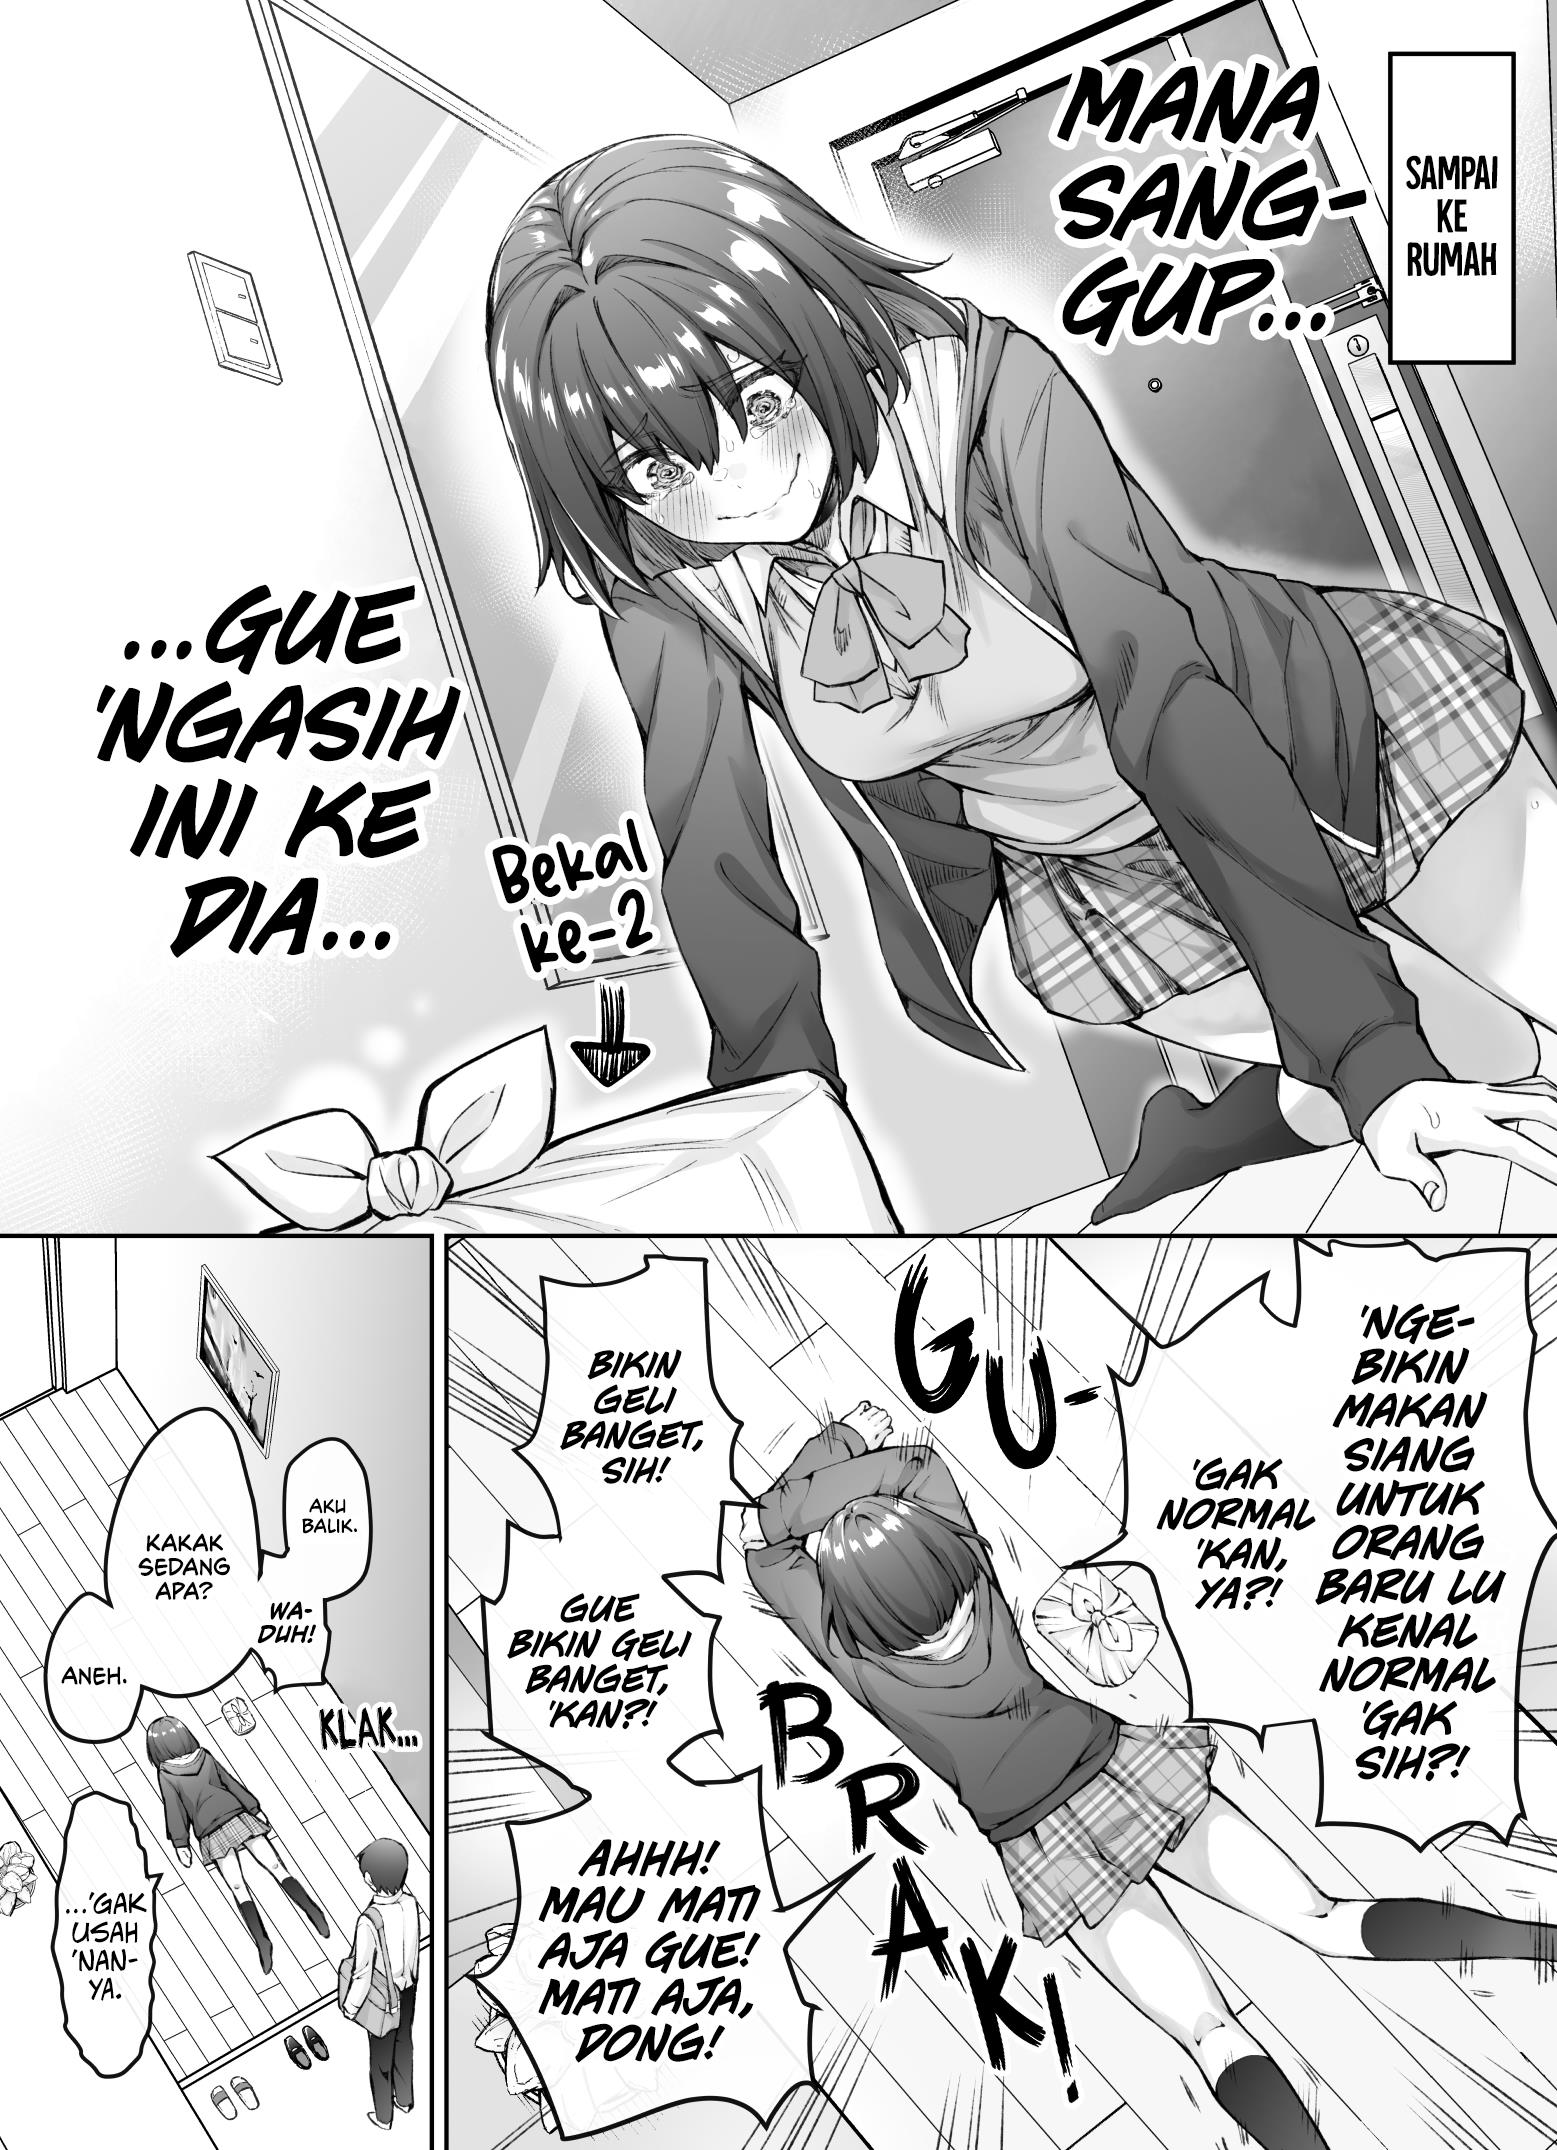 The Tsuntsuntsuntsuntsuntsun tsuntsuntsuntsuntsundere Girl Getting Less and Less Tsun Day by Day Chapter 17.2